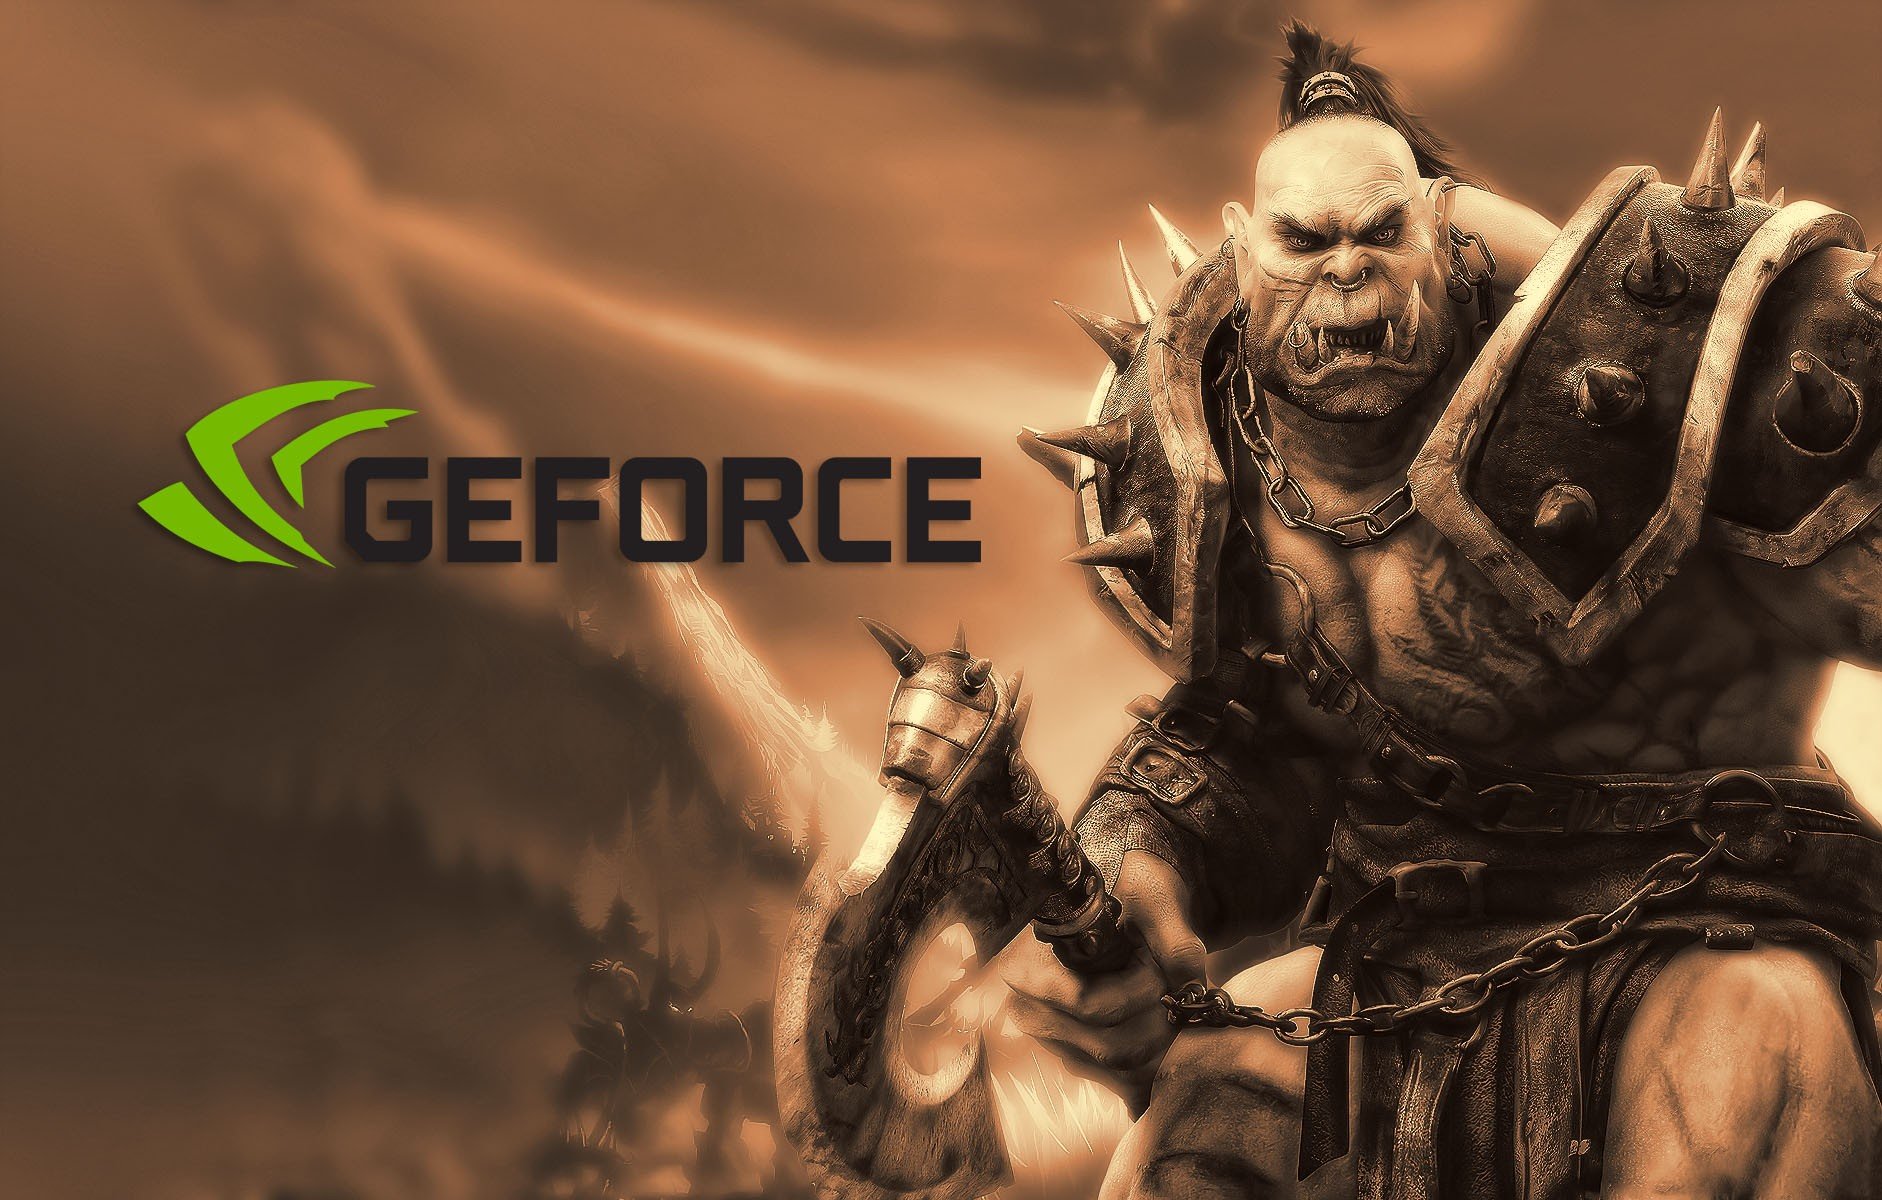 Gamers Geforce Nvidia Wallpapers Hd Desktop And Mobile Of Geforce Background